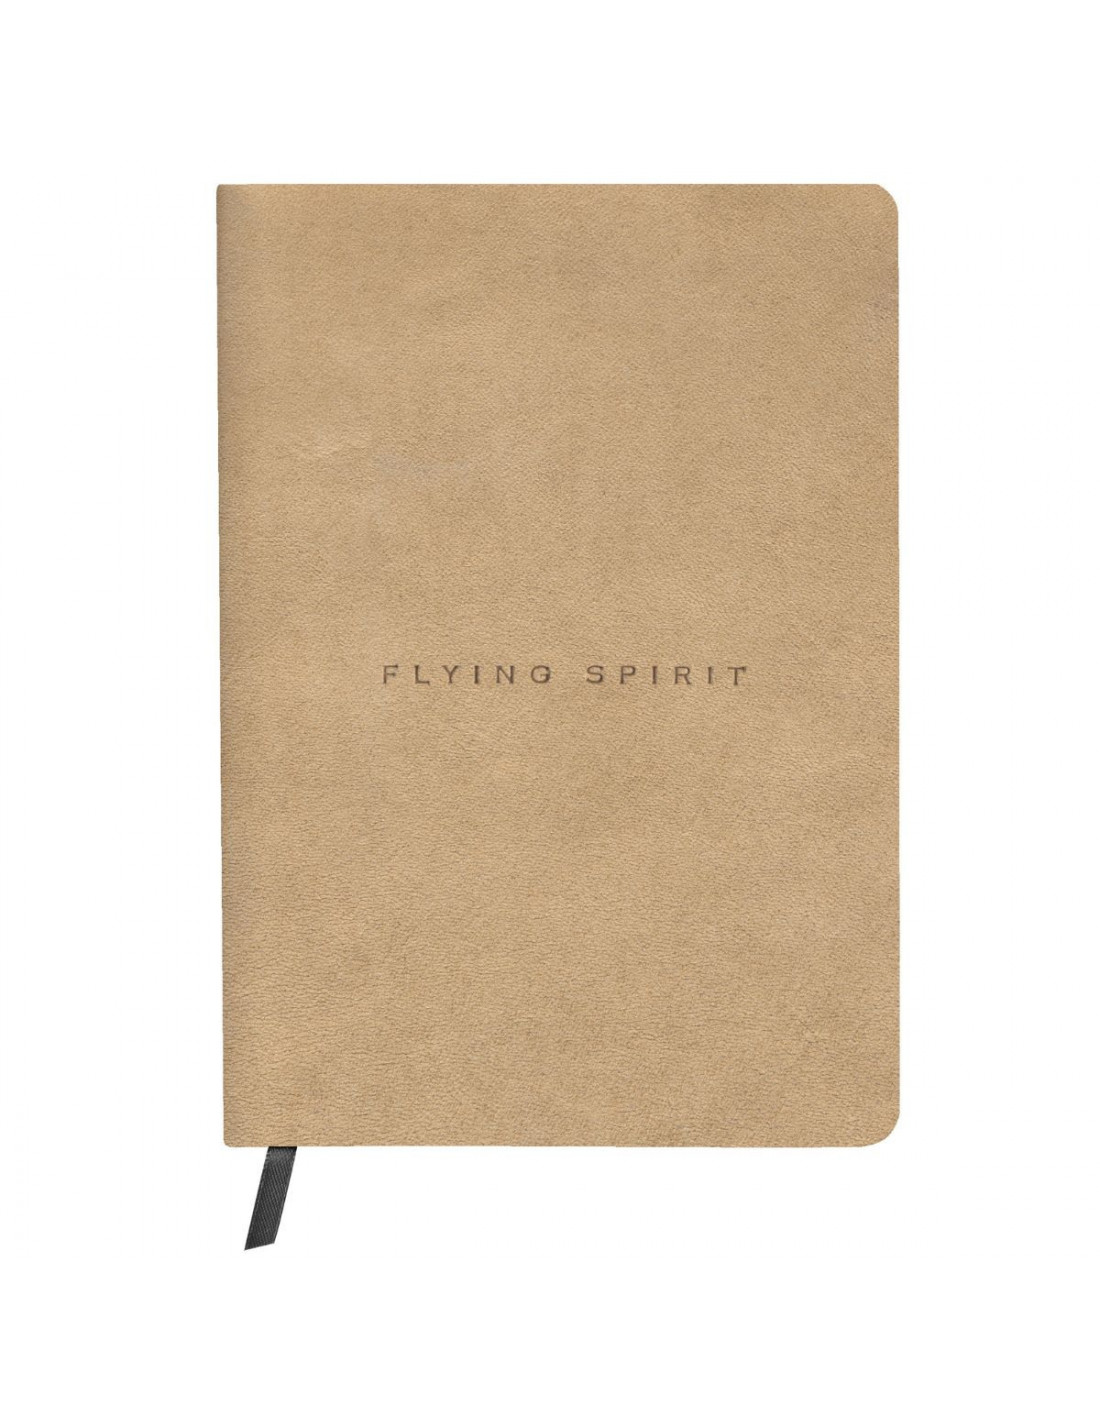 Flying Spirit Leather Collection Notebook - Aged Leather BEIGE - Lined - Clairefontaine